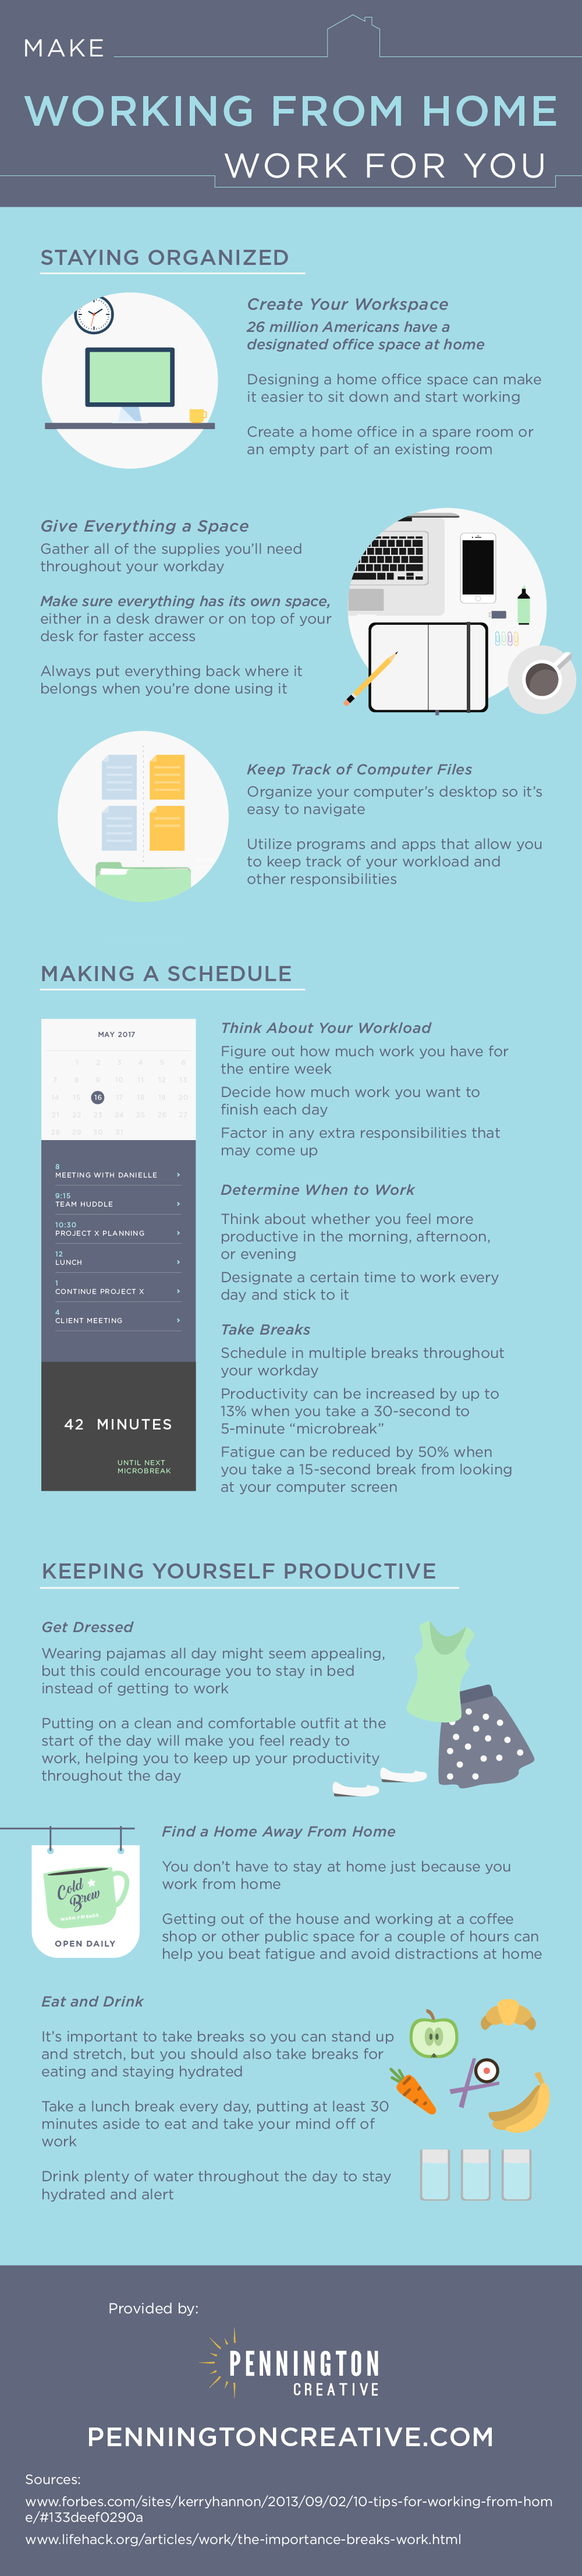 Make Working from Home Work for You - #infographic